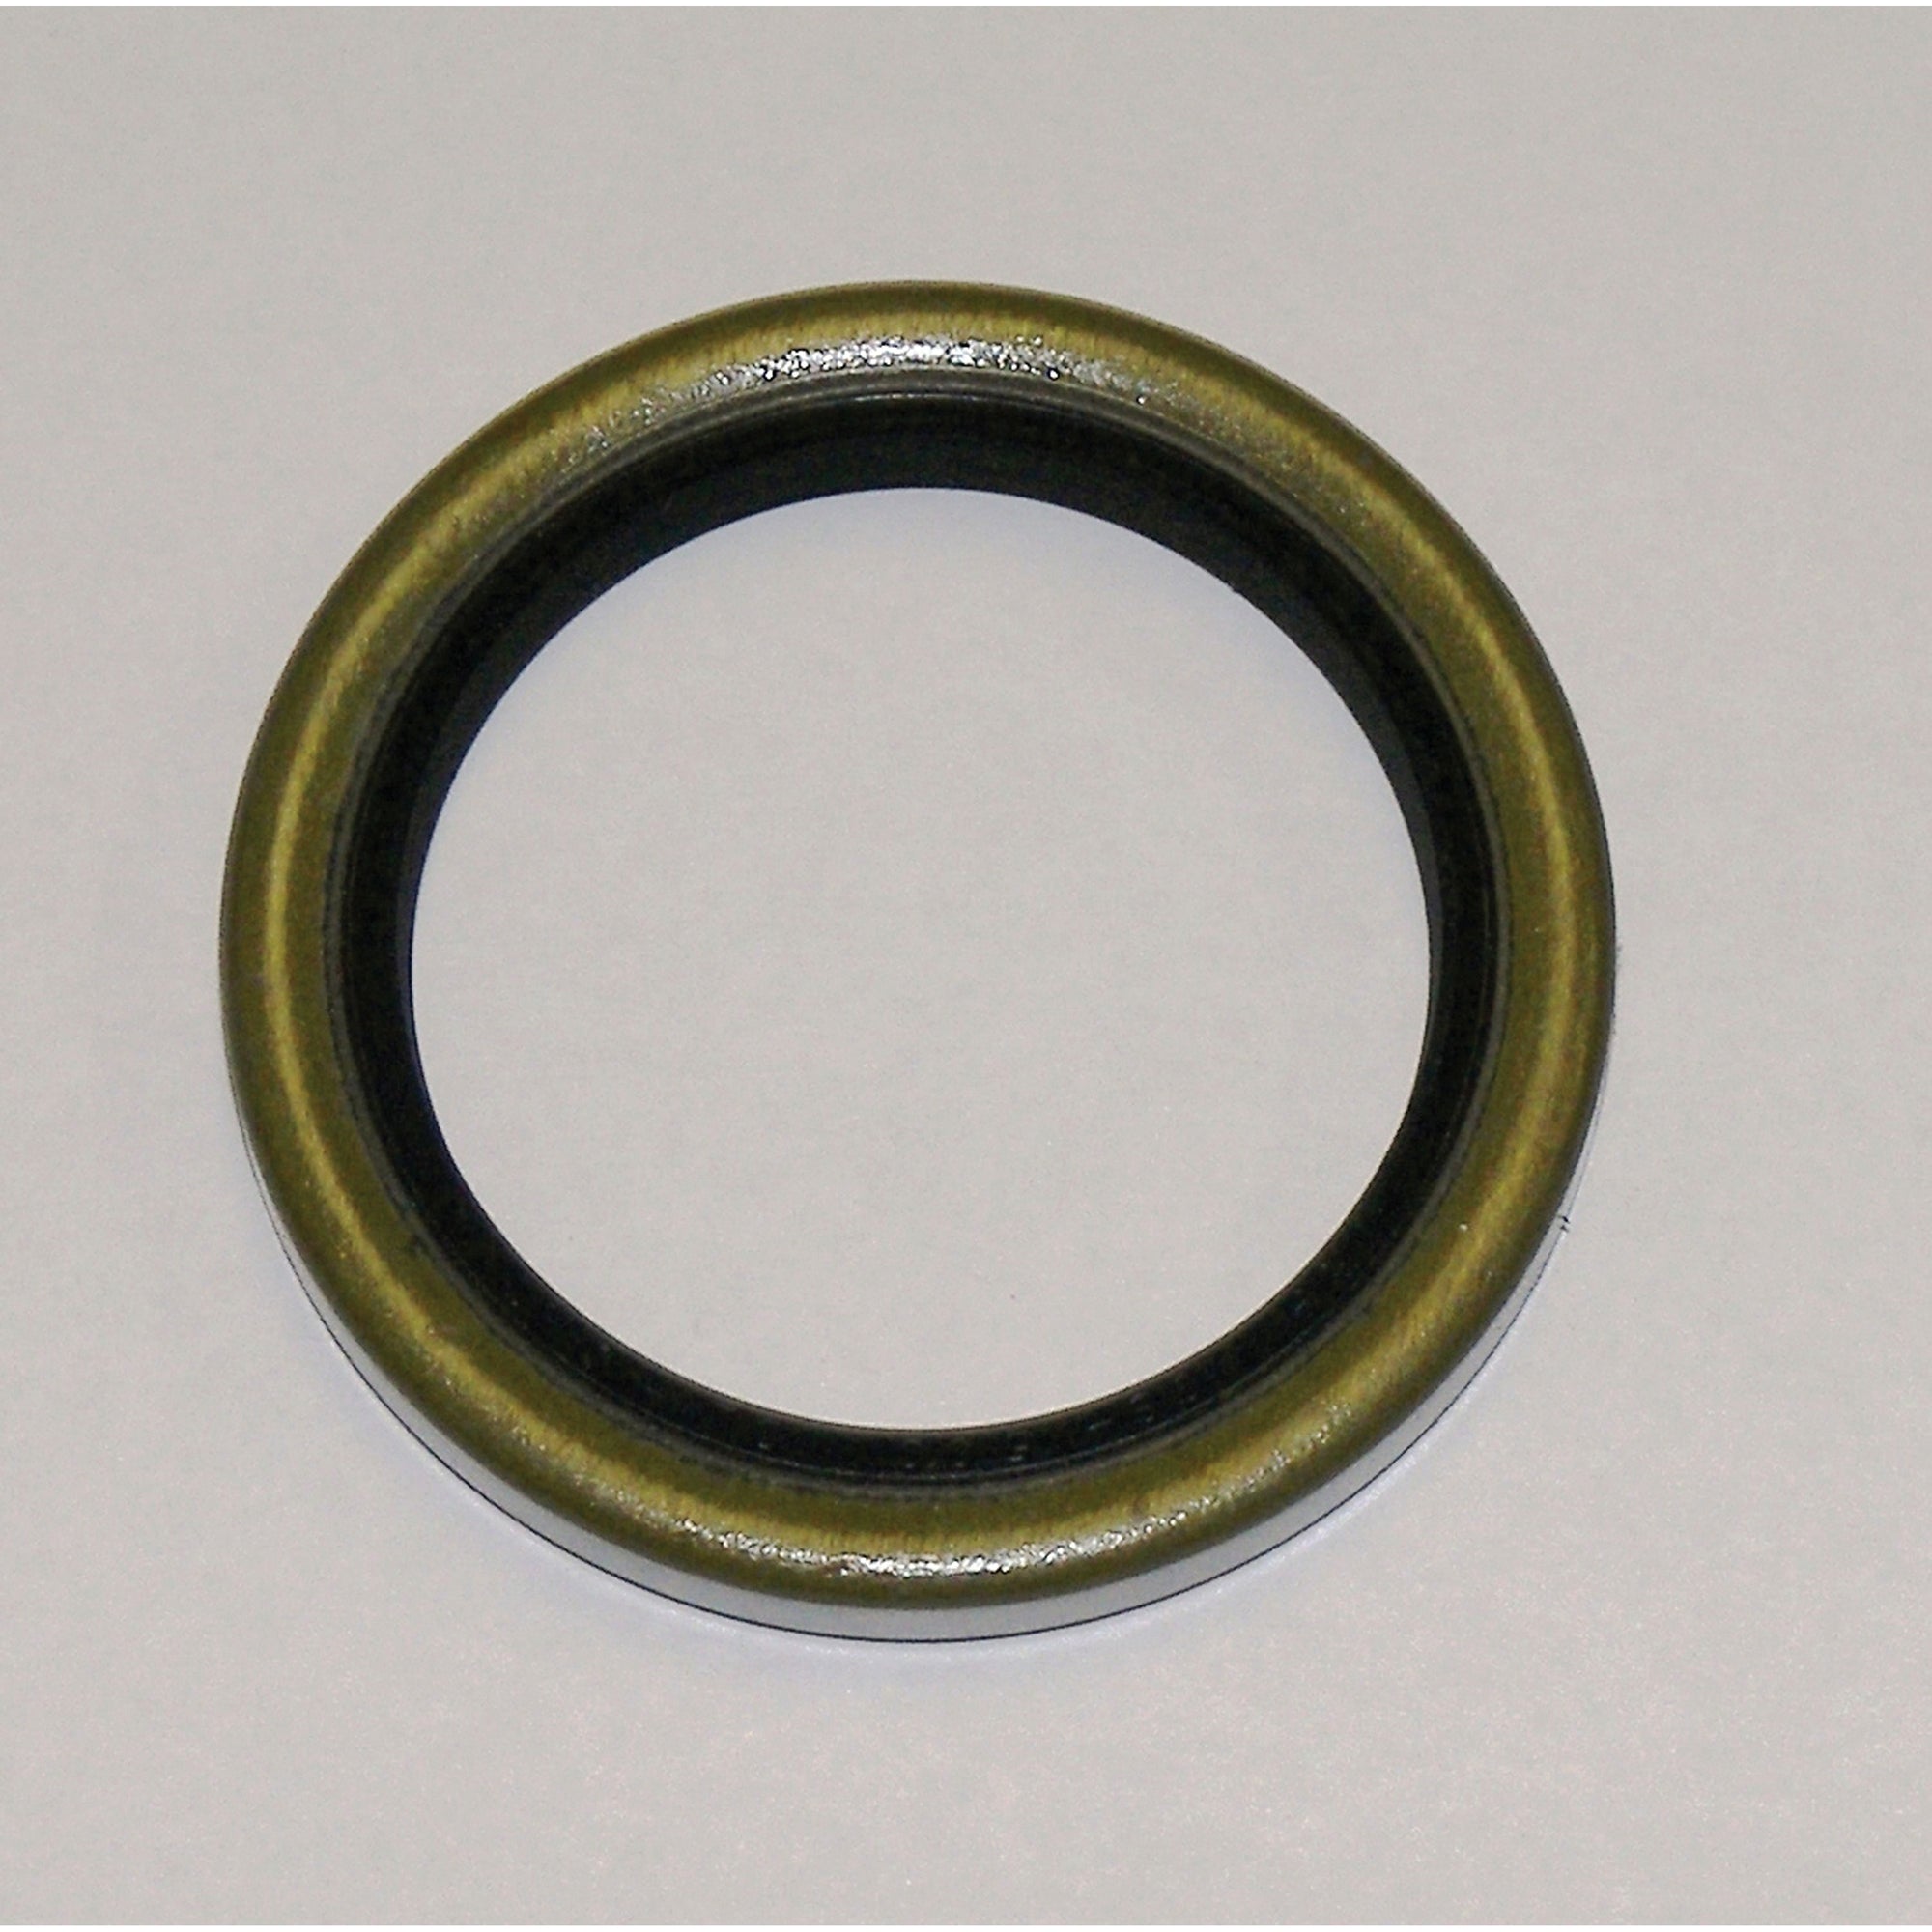 AP Products 014-130035-2 Double Lip Grease Seal for 5,200 to 7,000 lb. Axles 2.125" Shaft x 3.376" OD - 2 Pack